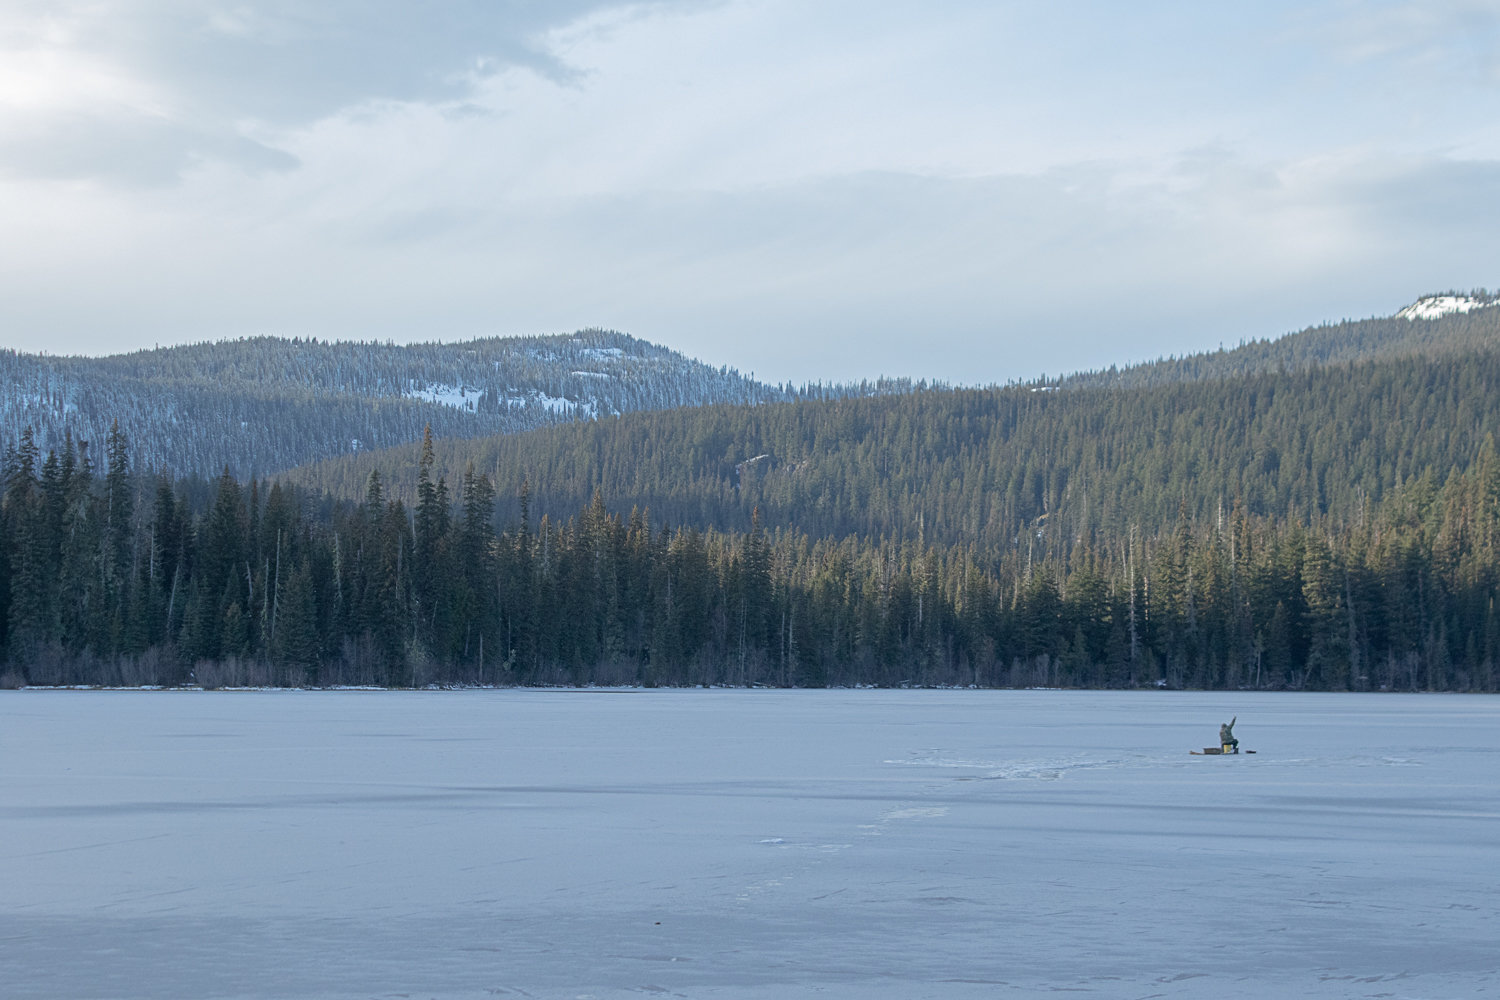 A lone fisherman tries his luck on the frozen surface of Dog Lake just east of White Pass on Nov. 23.